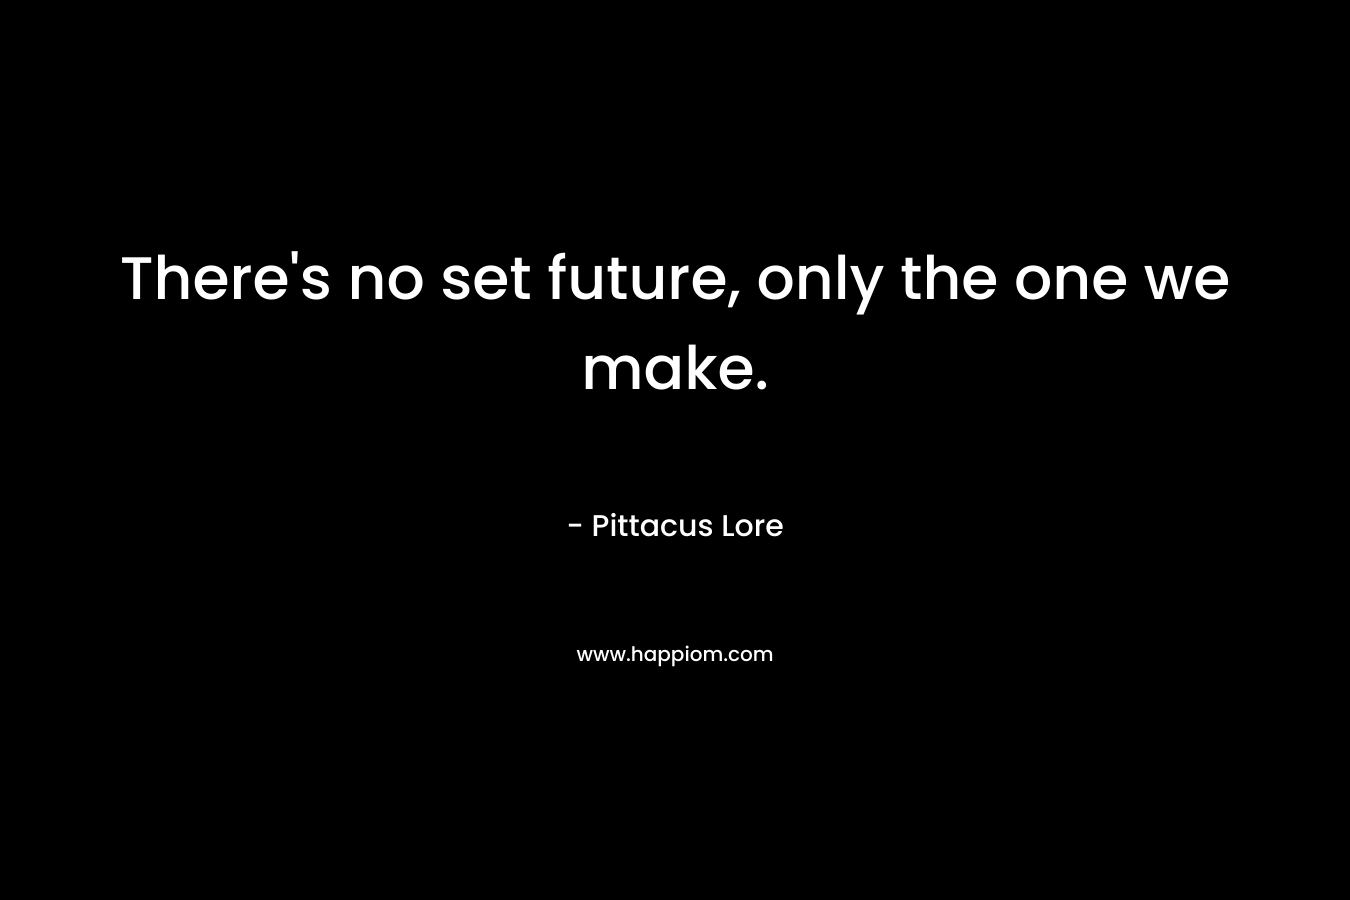 There's no set future, only the one we make.